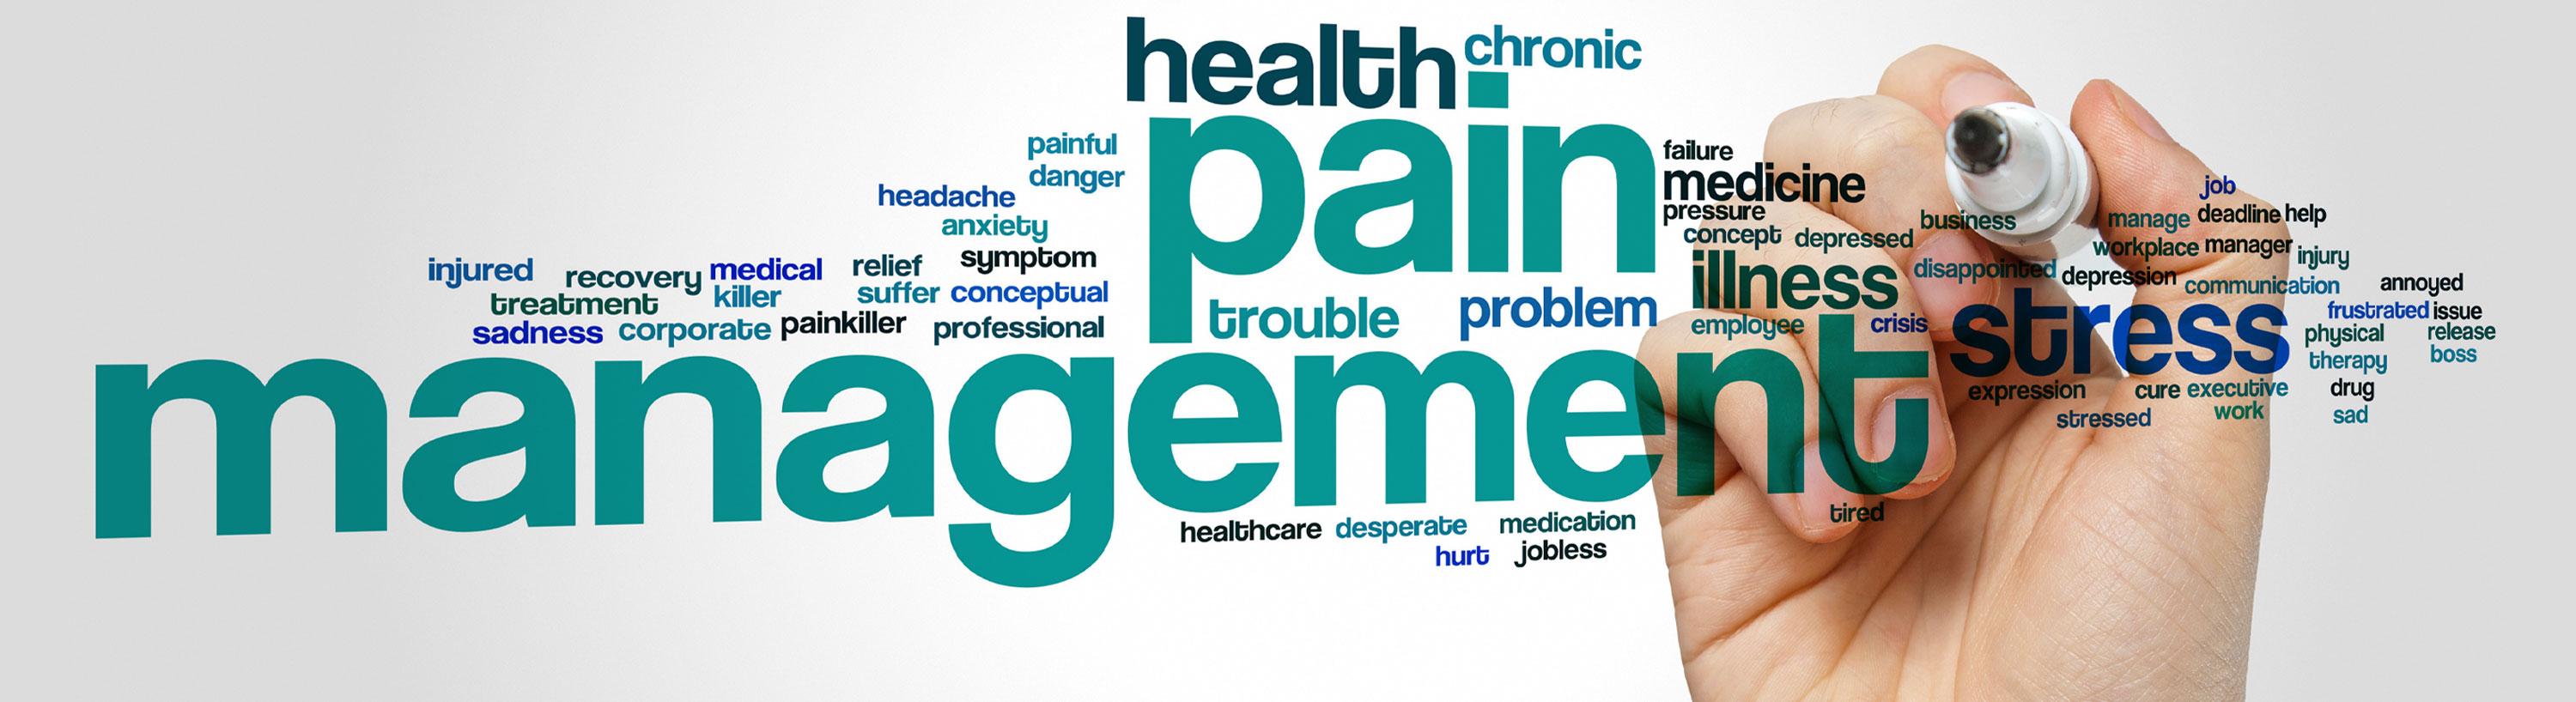 Banner background picture of a hand holding a marker pointed towards the camera. It says "Pain Management" in big text and has small text words that define Pain Management.